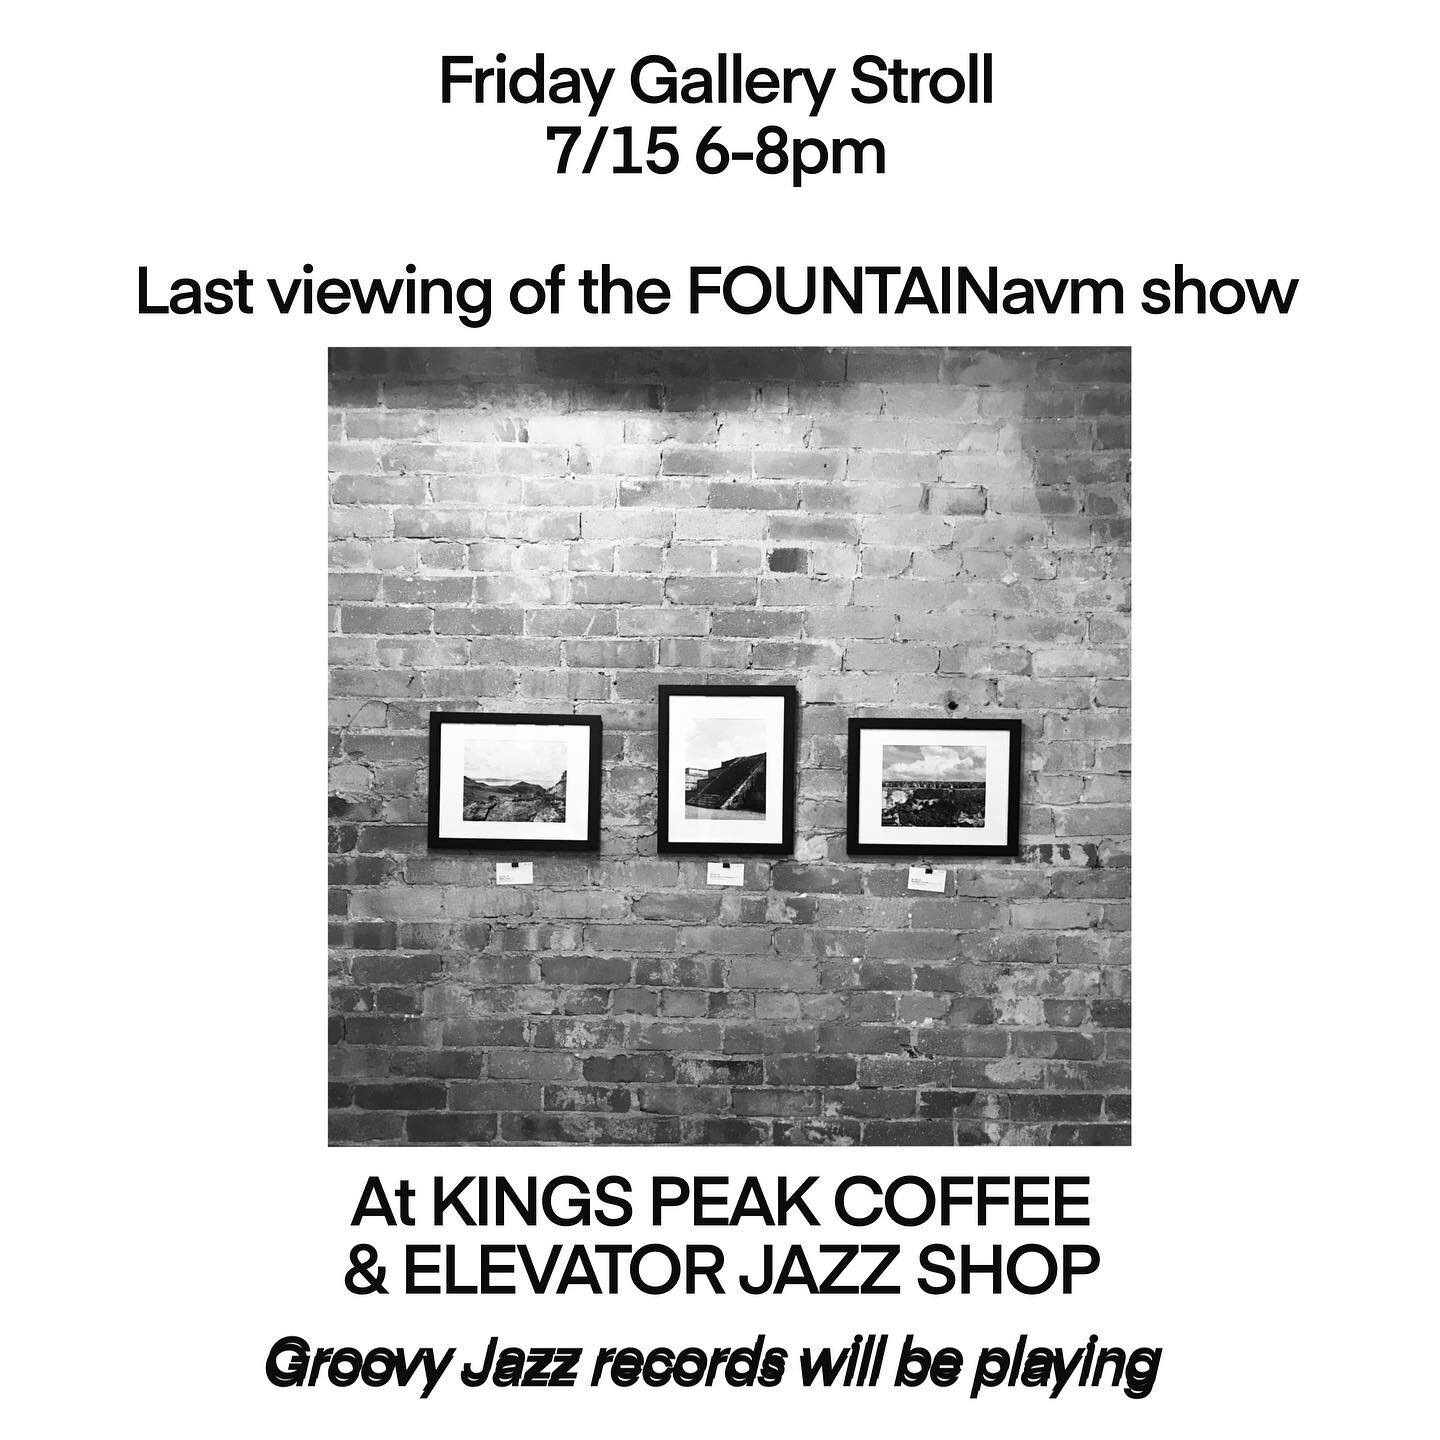 Come by and hang at @kingspeakcoffeeroasters and @elevator.jazzshop and check the current FAVM art show for the last time.  We will be playing groovy JAZZ records from the ELEVATOR